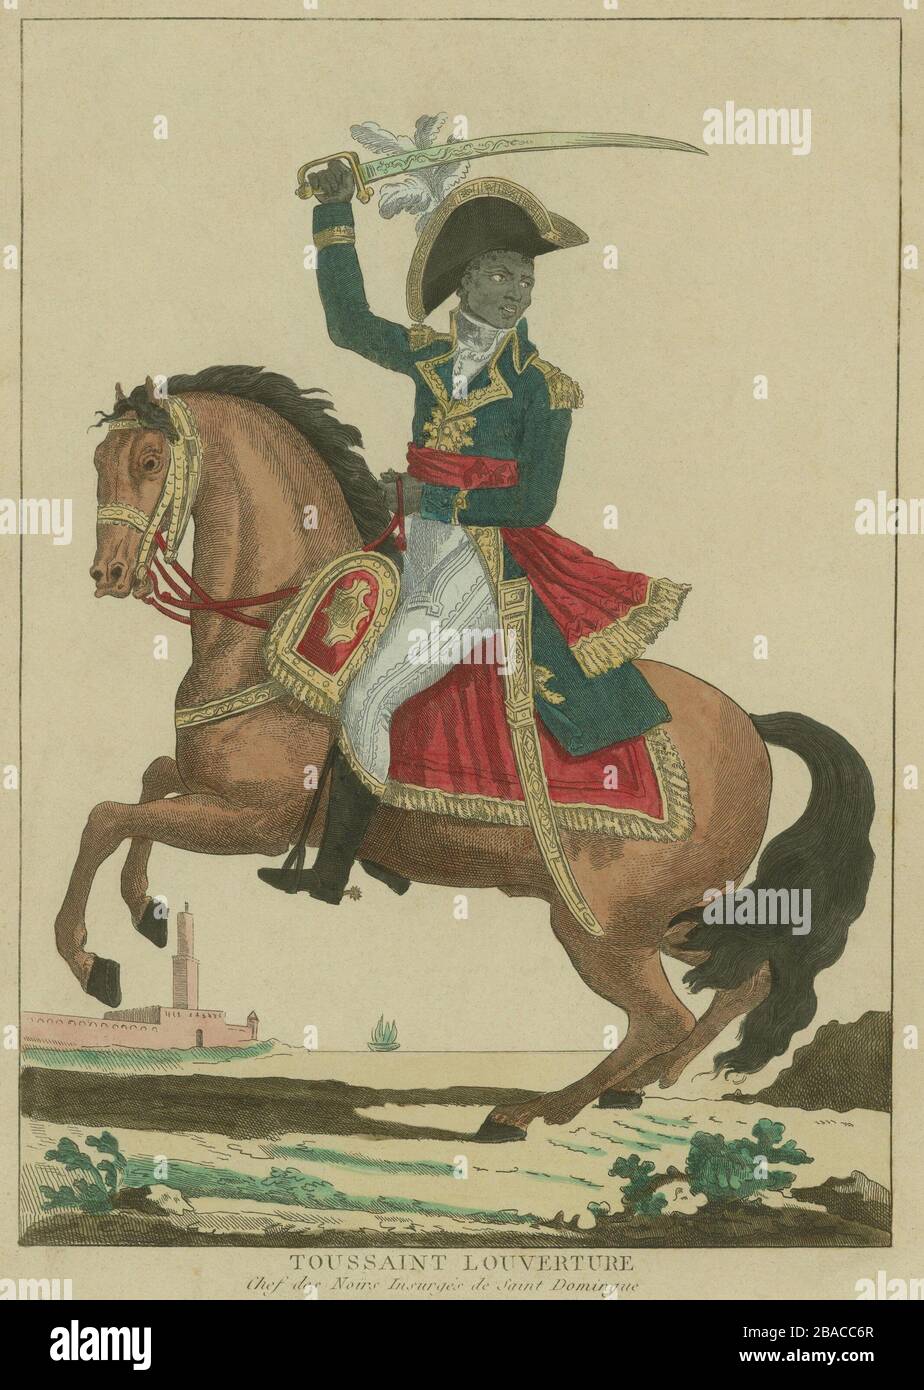 Toussaint Louverture on horseback, ca. 1800. He led insurgent Africans slaves against Spanish and French rulers. As Haiti's leader he entered into a French protectorate in 1801, but was betrayed and died in a French prison in 1803. This print was published in France part of a series of portraits of generals of the French Revolution.  (BSLOC 2020 1 219) Stock Photo